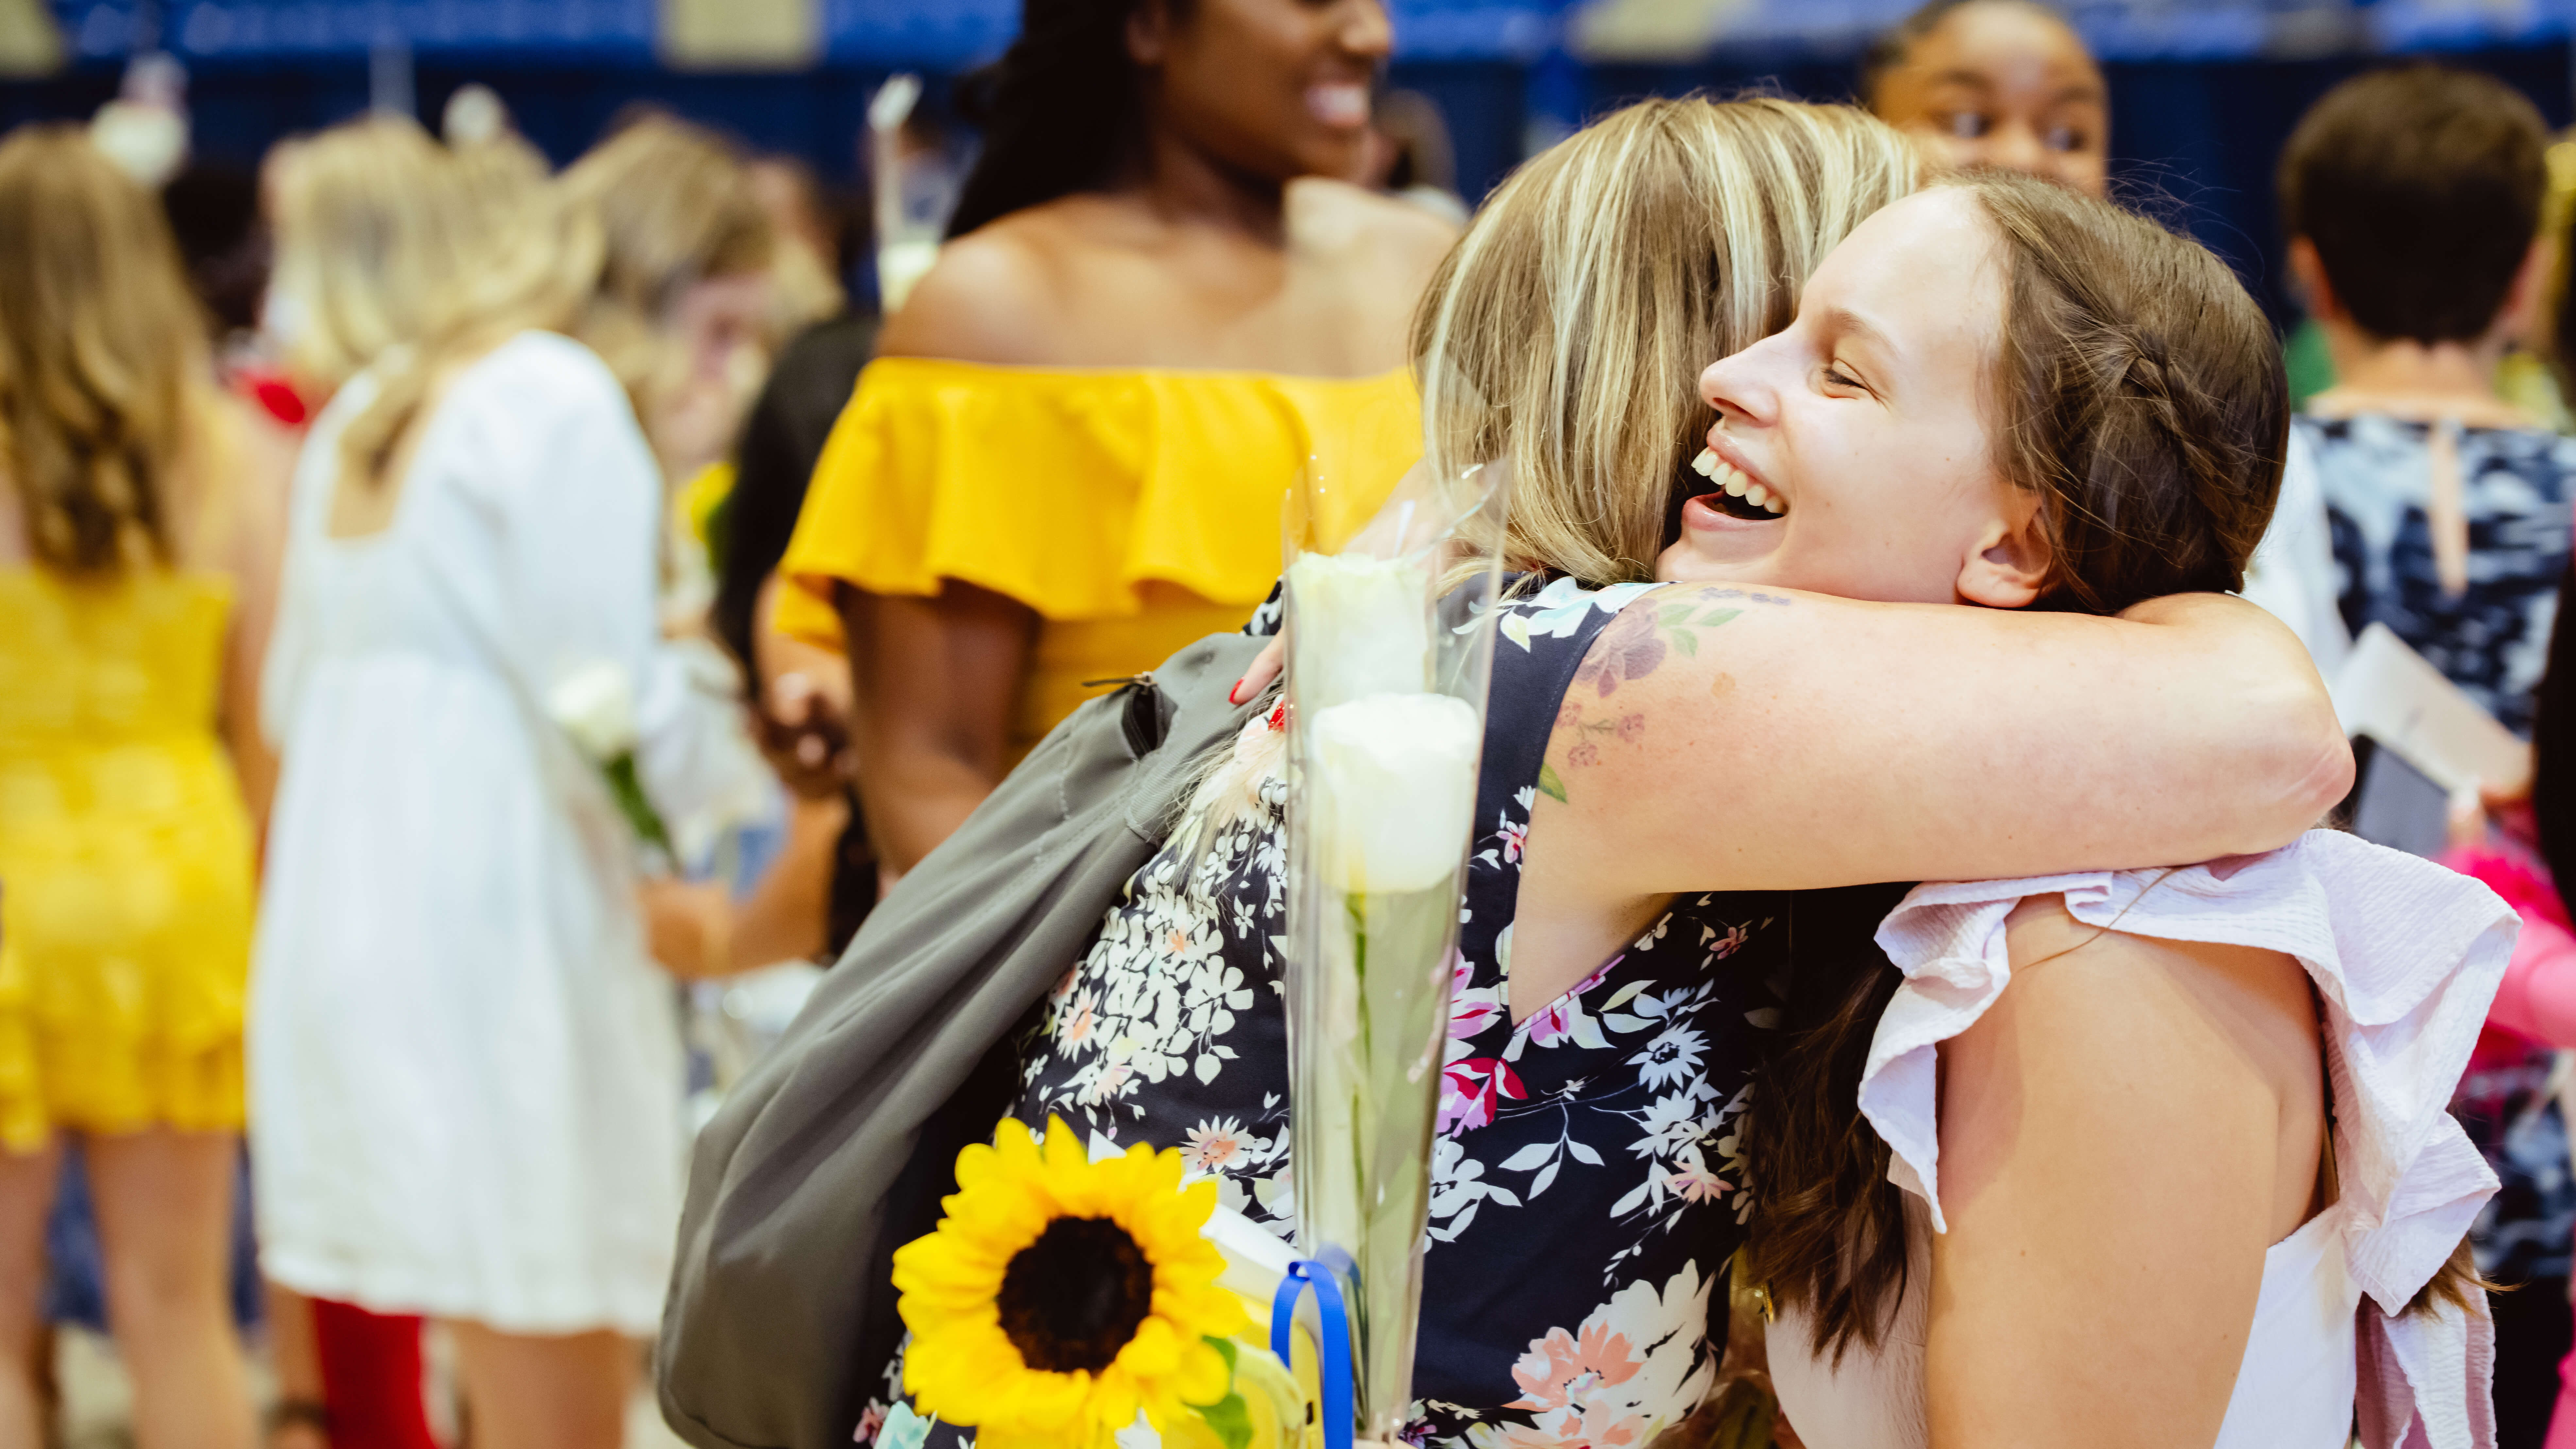 Graduates hug their family and friends after the Pinning Ceremony